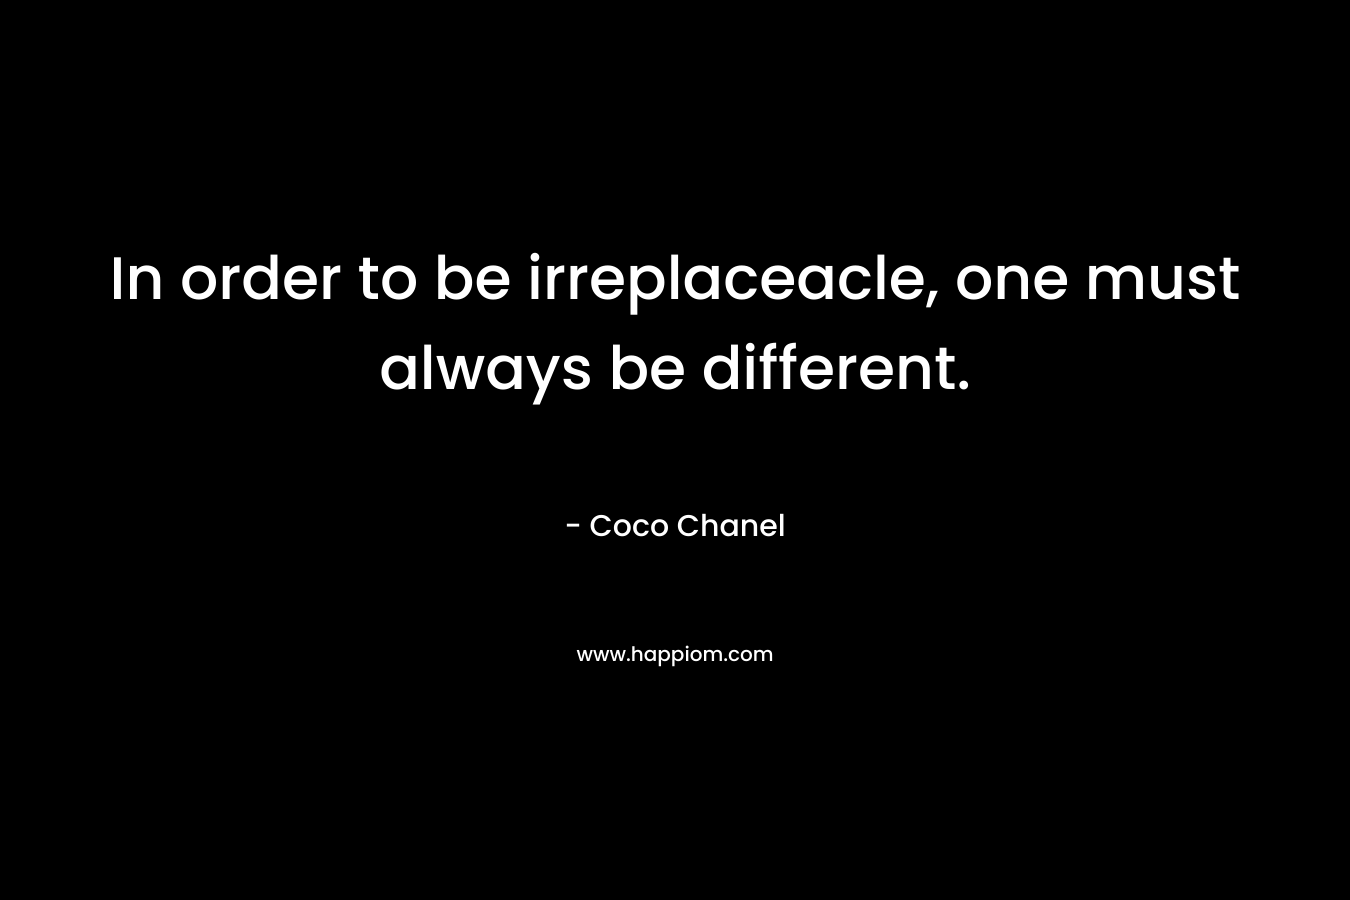 In order to be irreplaceacle, one must always be different. – Coco Chanel